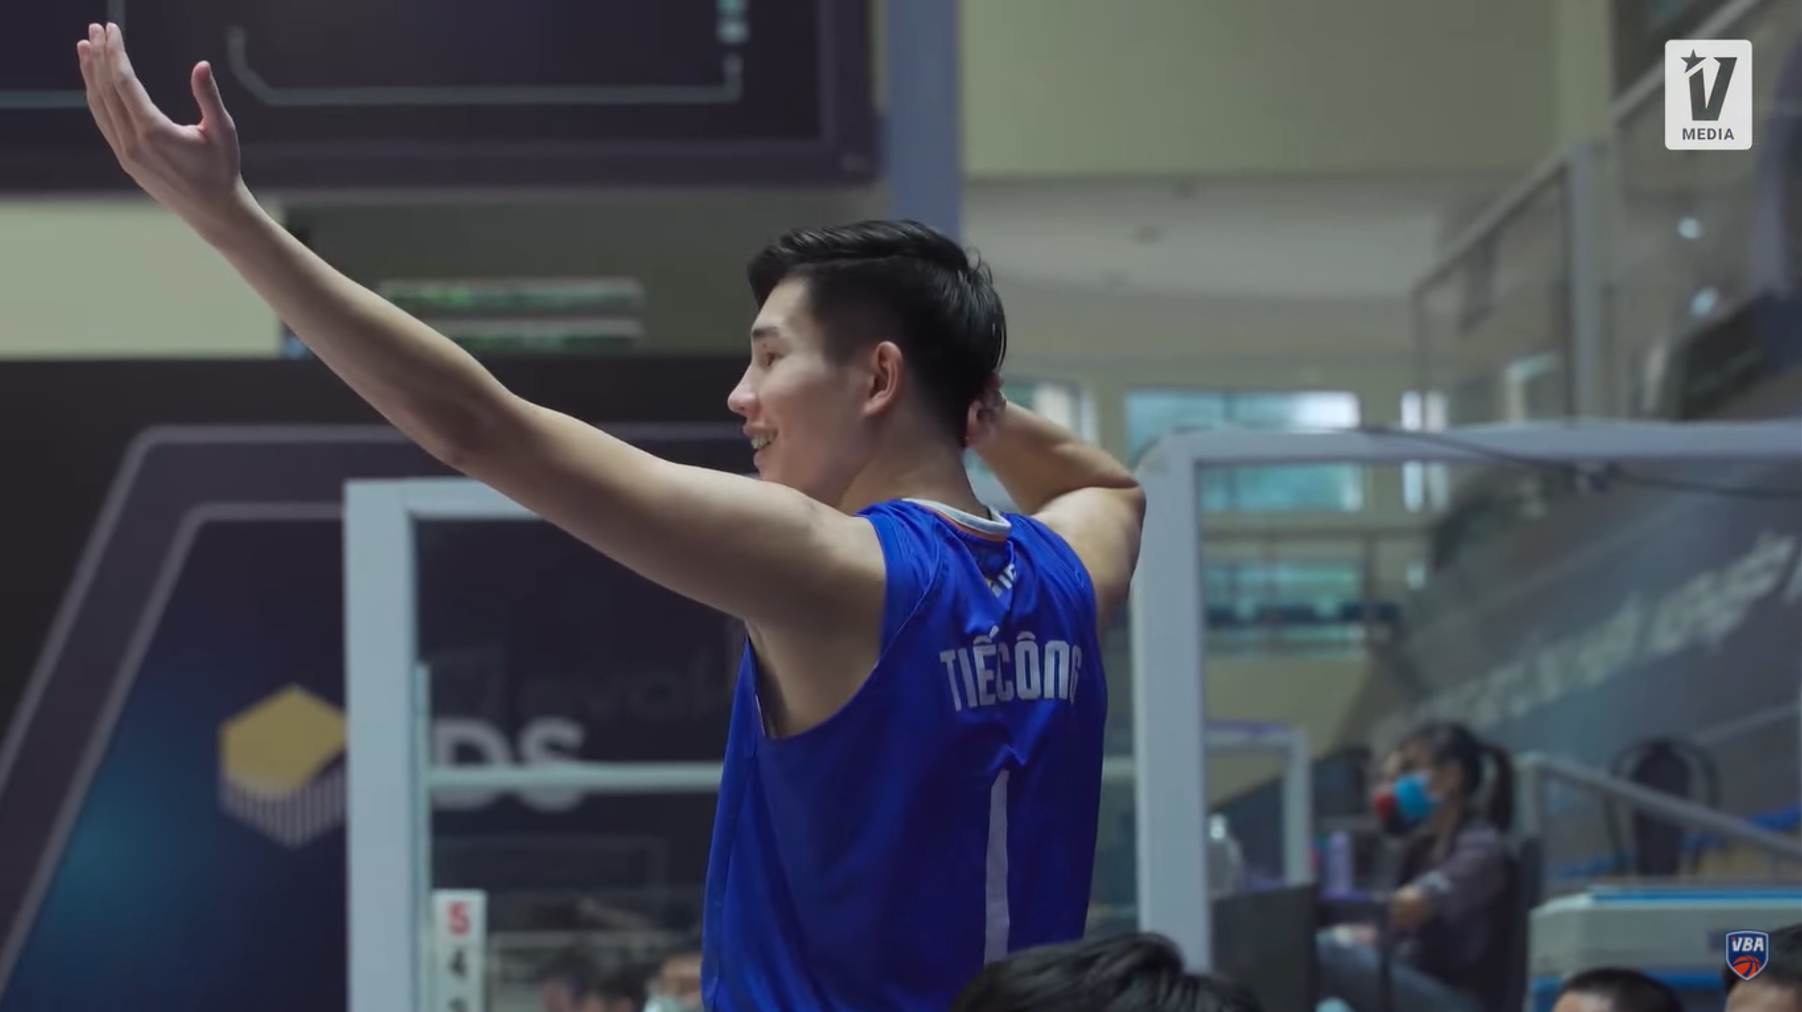 Meet this VBA player who is famous for taunts